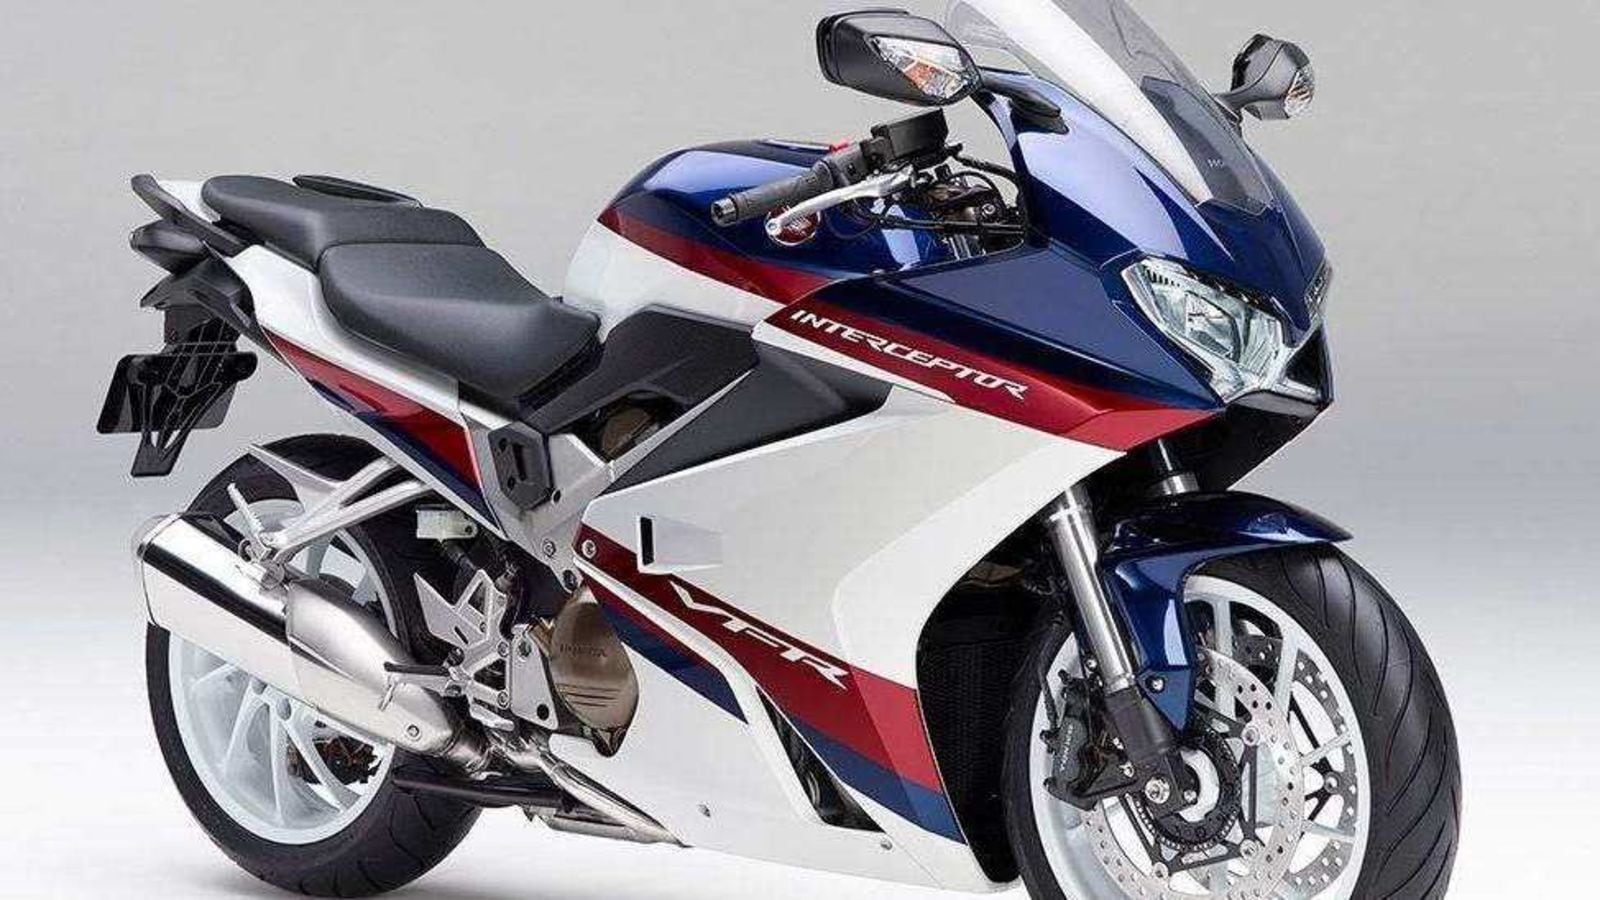 Honda's new V4 sports bike expected to land in 2023 | HT Auto